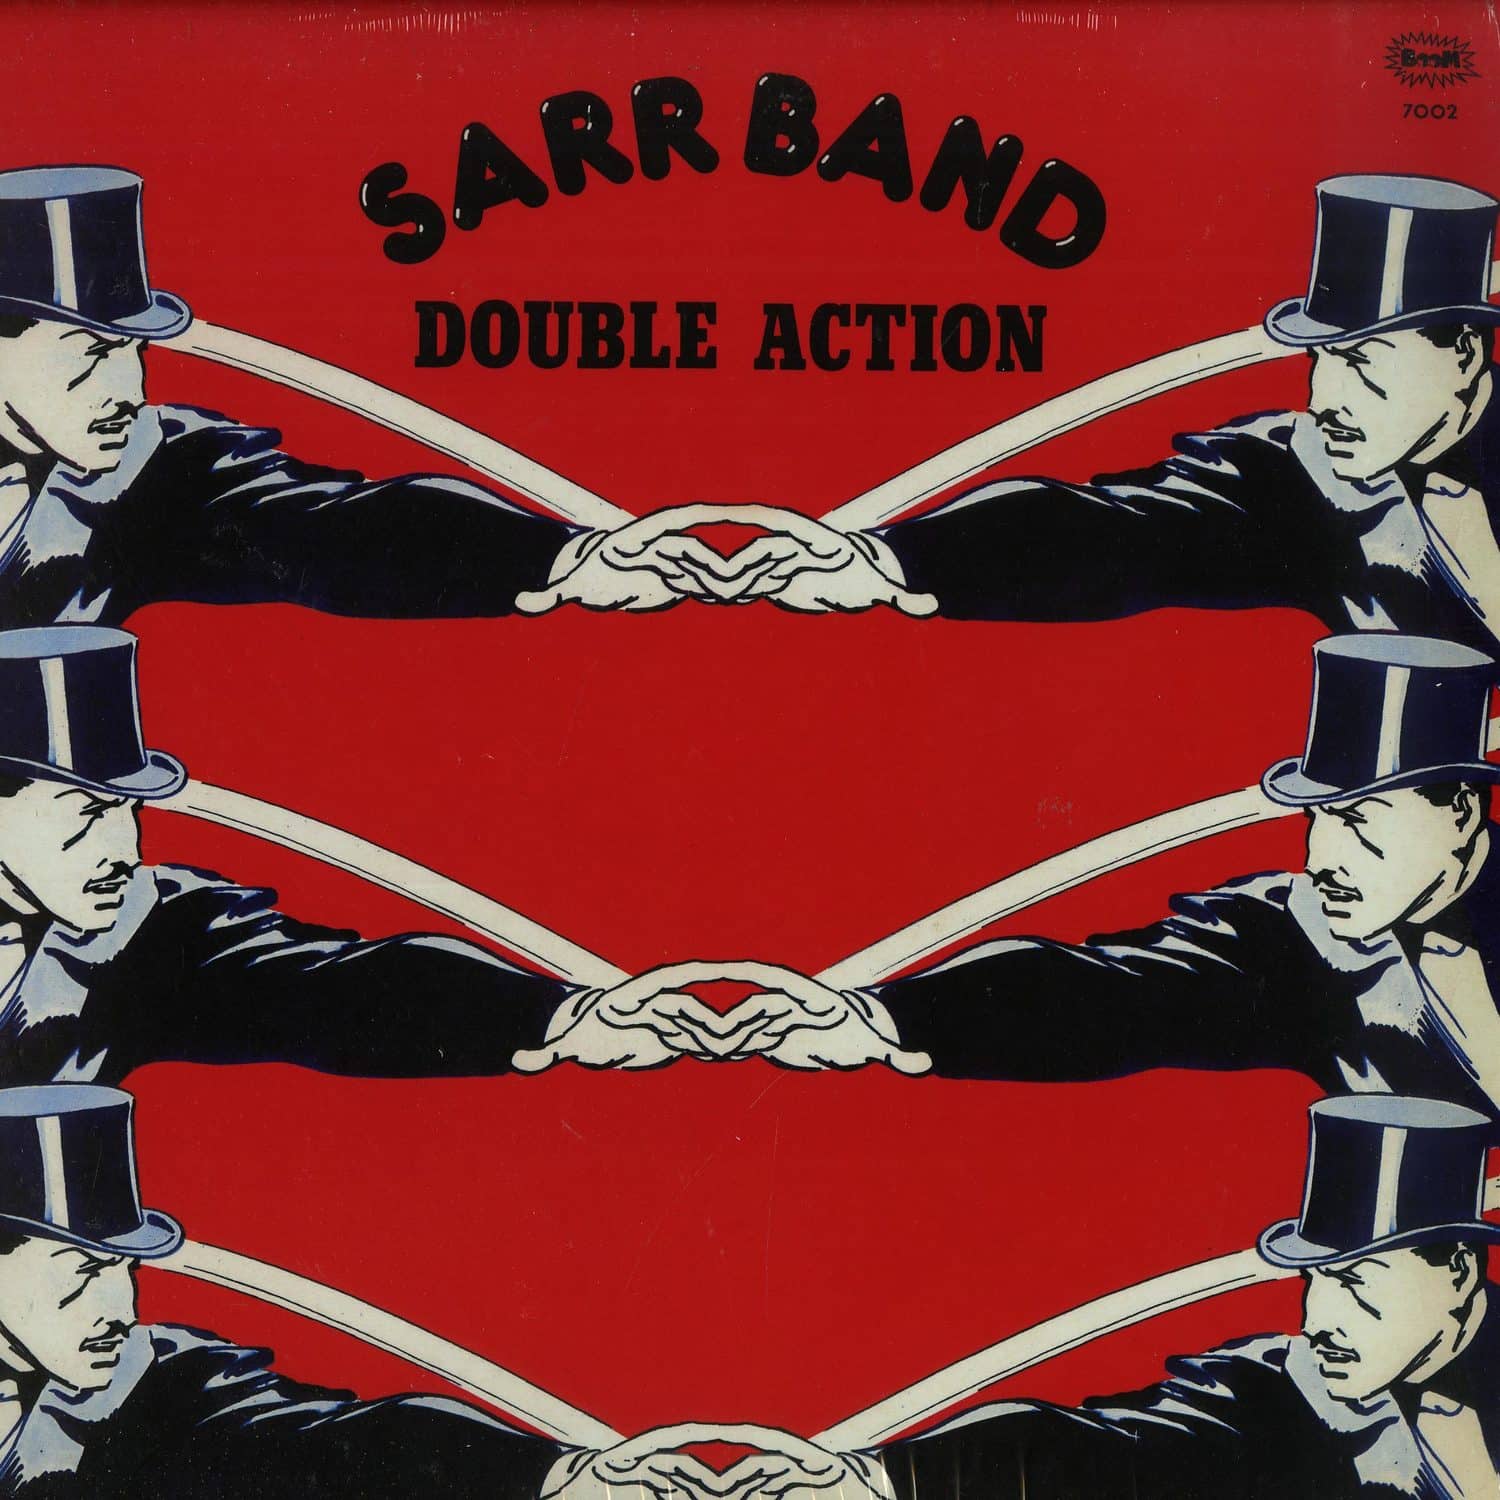 Sarr Band - DOUBLE ACTION 